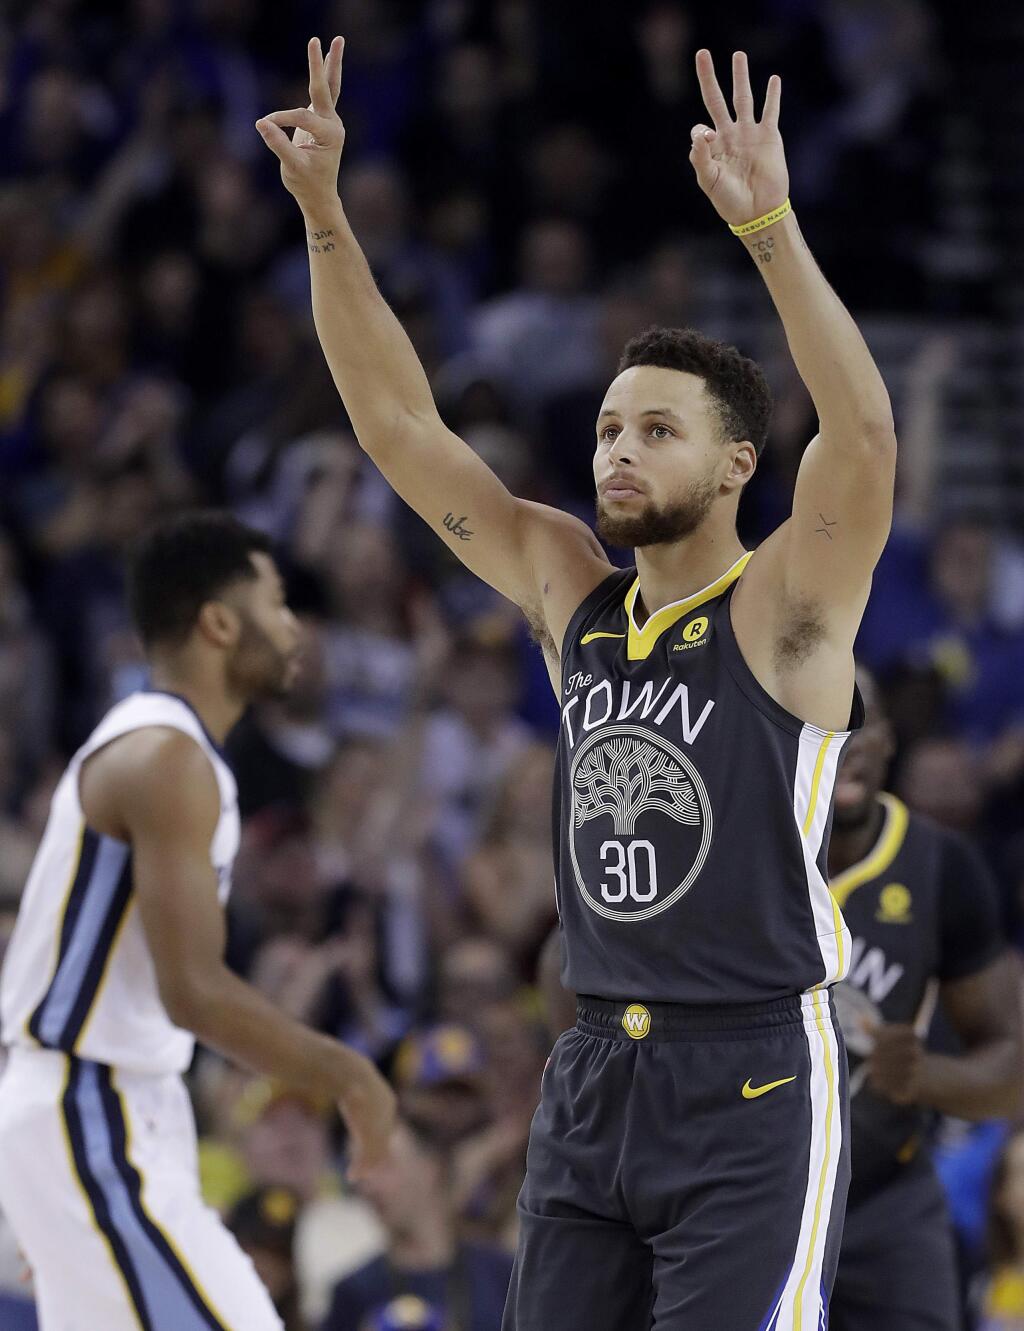 Golden State Warriors guard Stephen Curry (30) gestures after scoring during the first half of the team's NBA basketball game against the Memphis Grizzlies in Oakland, Calif., Saturday, Dec. 30, 2017. (AP Photo/Jeff Chiu)